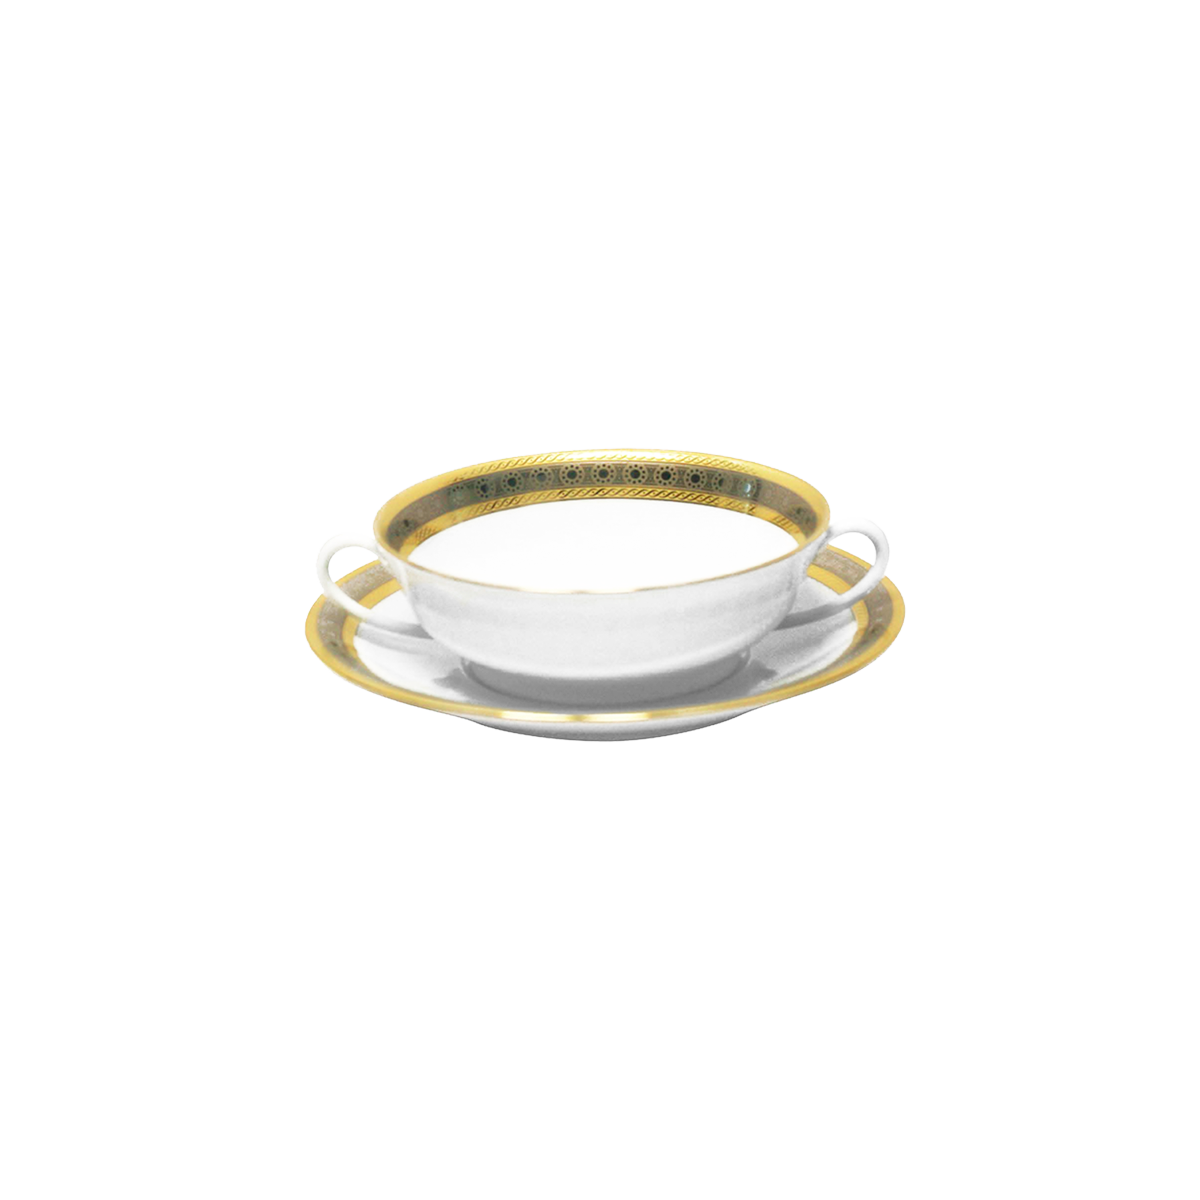 Place Vendome Soup Cup And Saucer